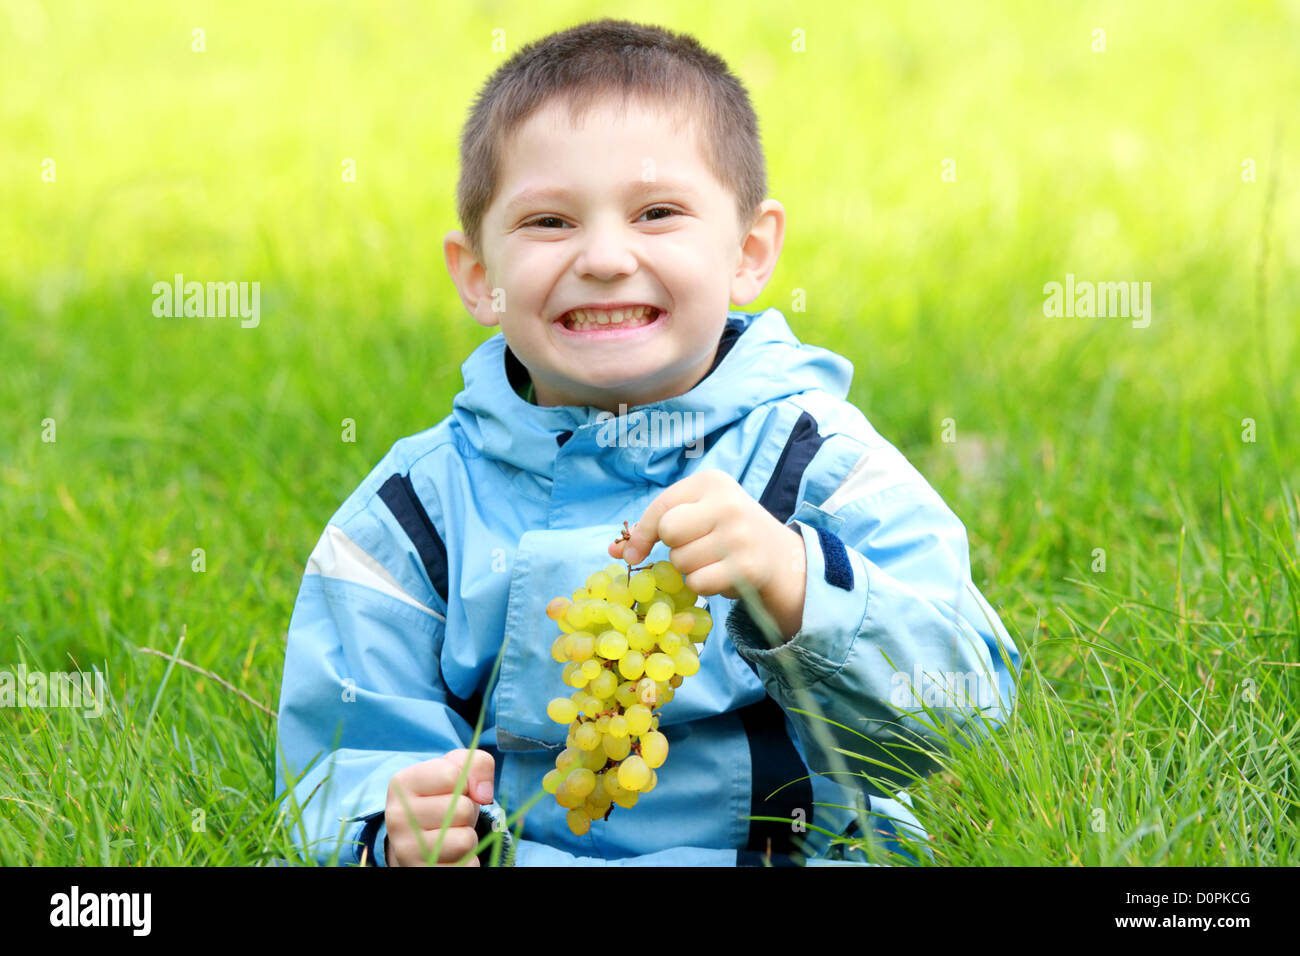 Toothy smiling boy with grapes Stock Photo